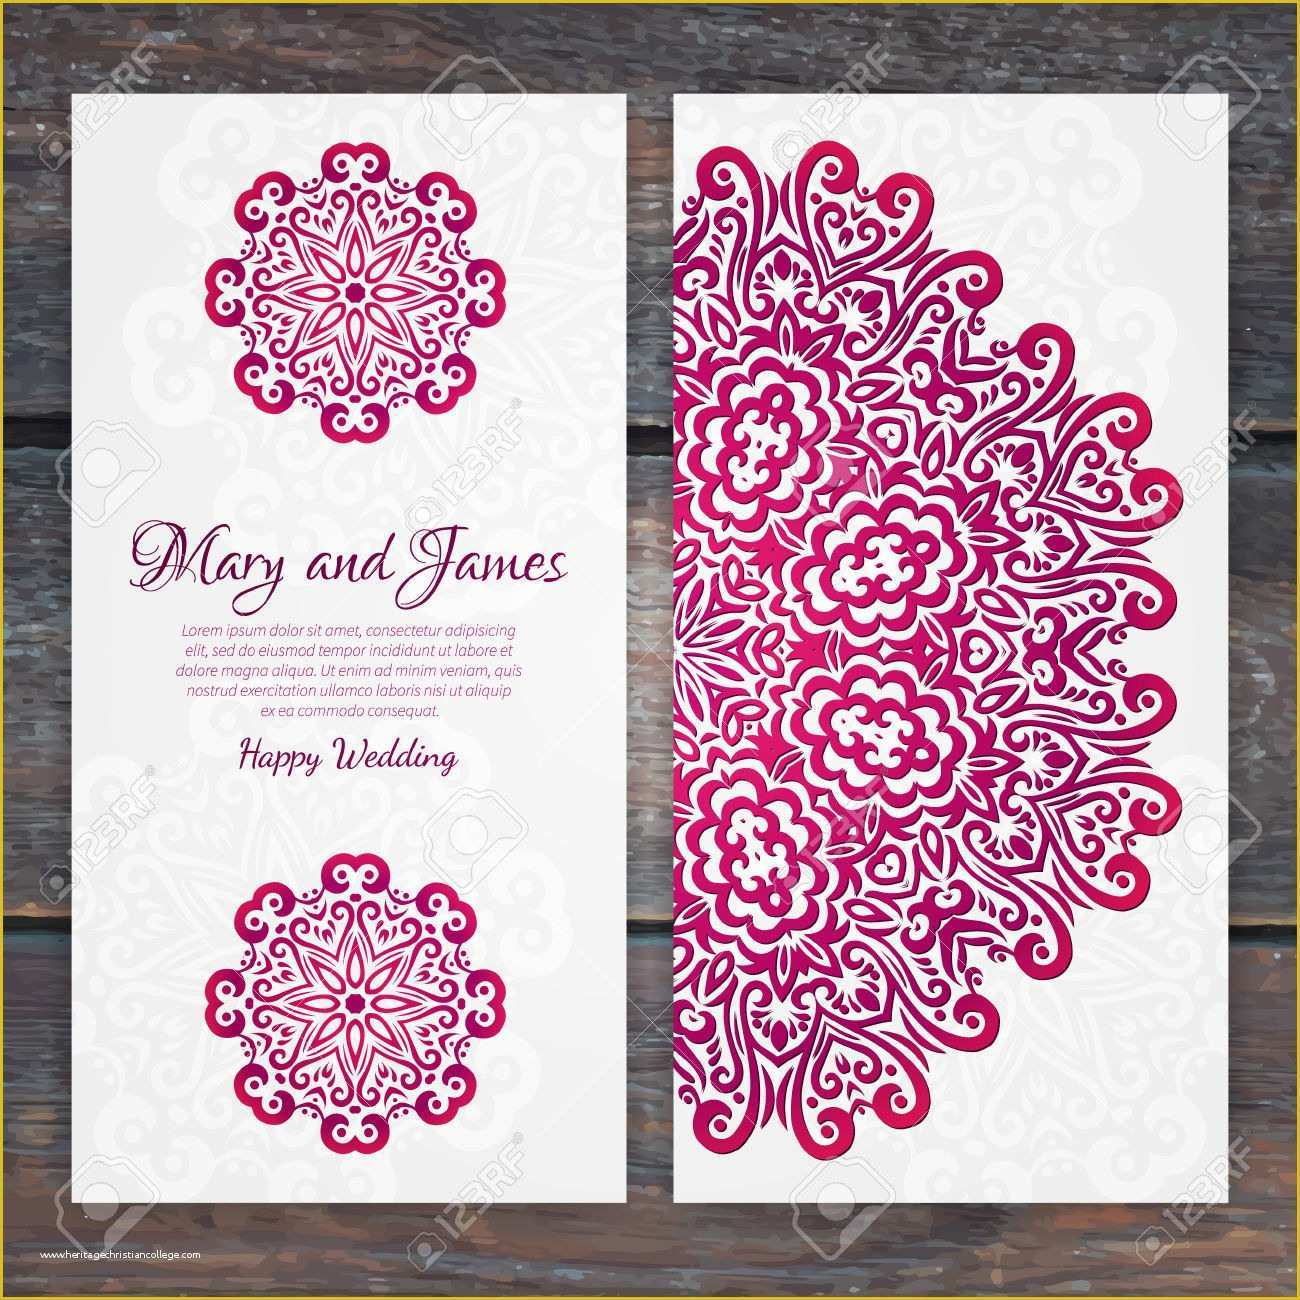 Email Indian Wedding Invitation Templates Free Of Free Indian Wedding Invitation Email Template Jin’s